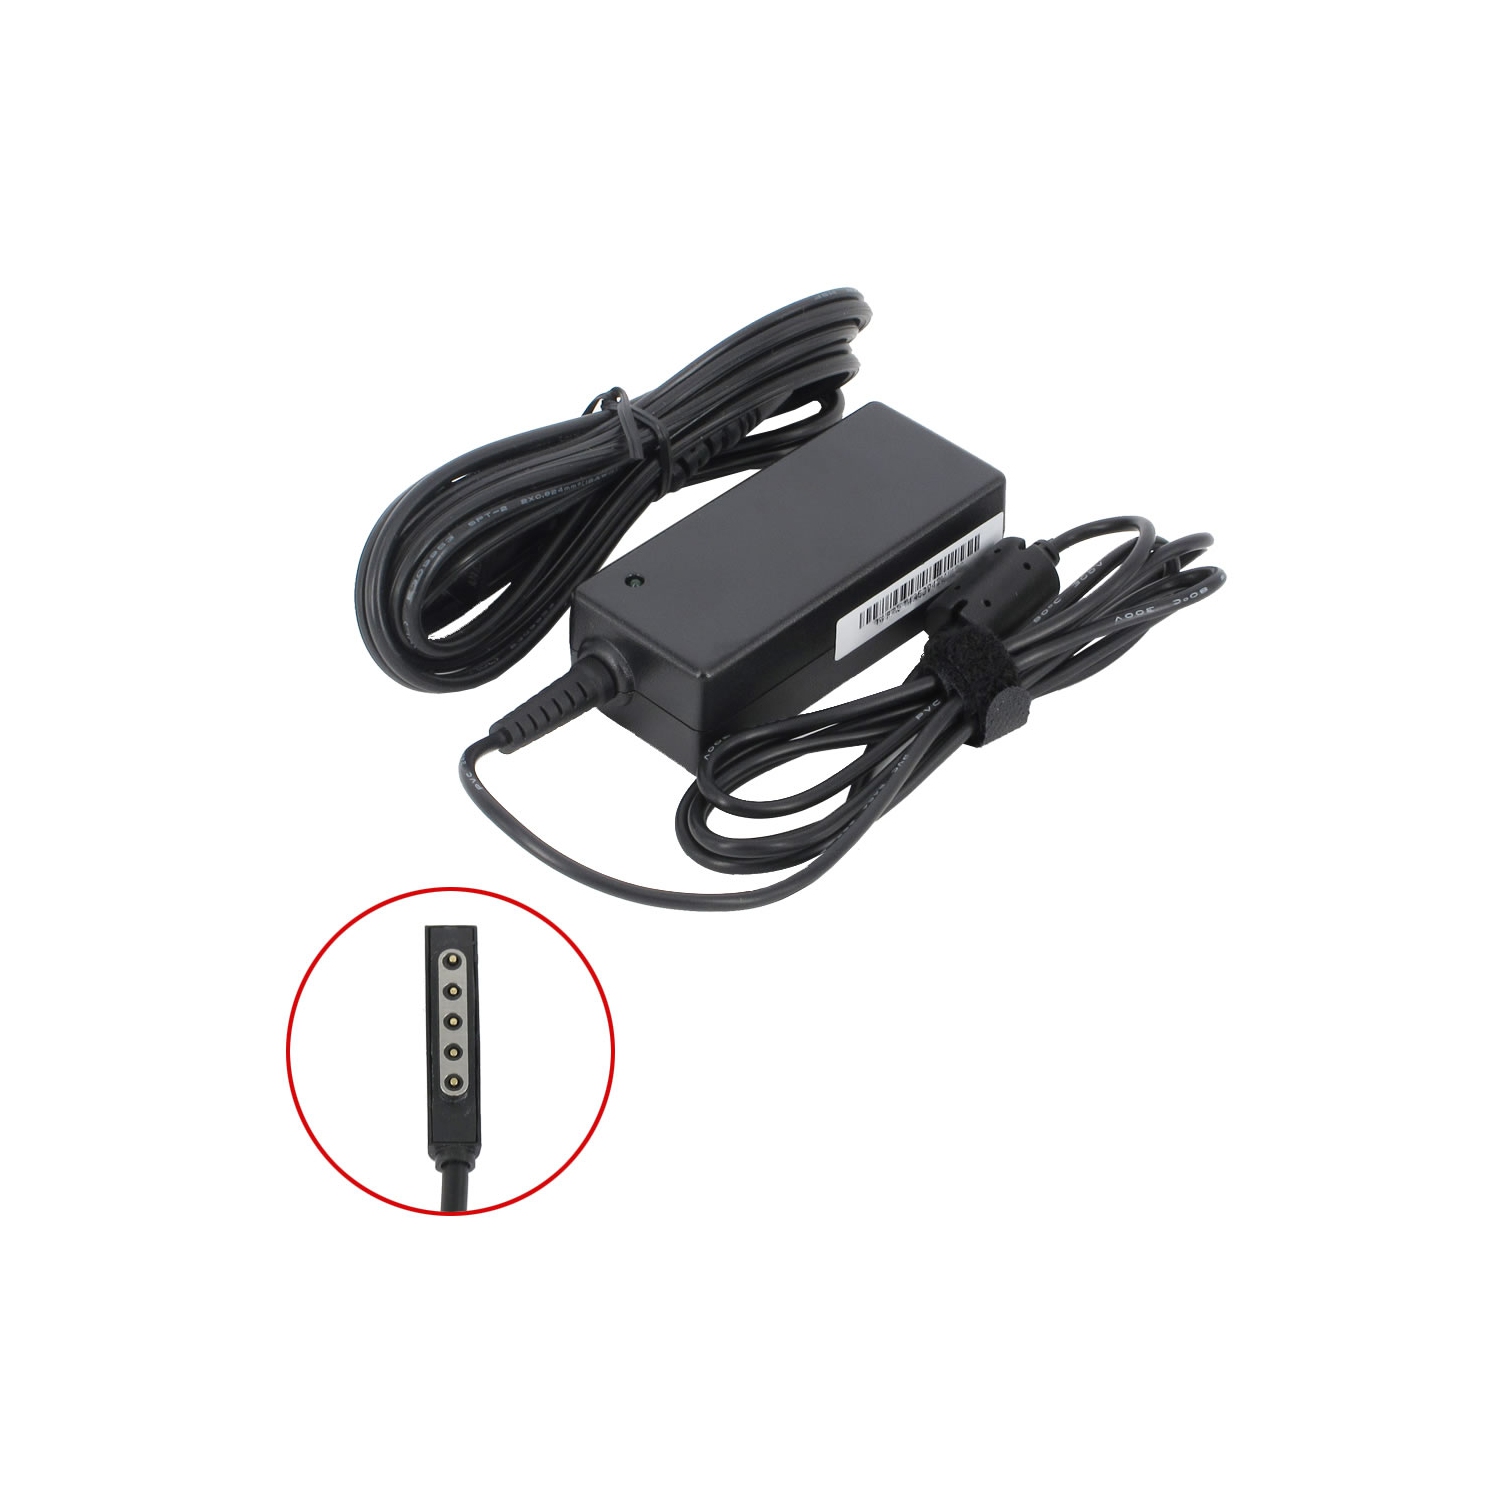 BattDepot: New Replacement Tablet AC Adapter for Microsoft Surface, Q6T-00001 (12V 3.6A 45W)